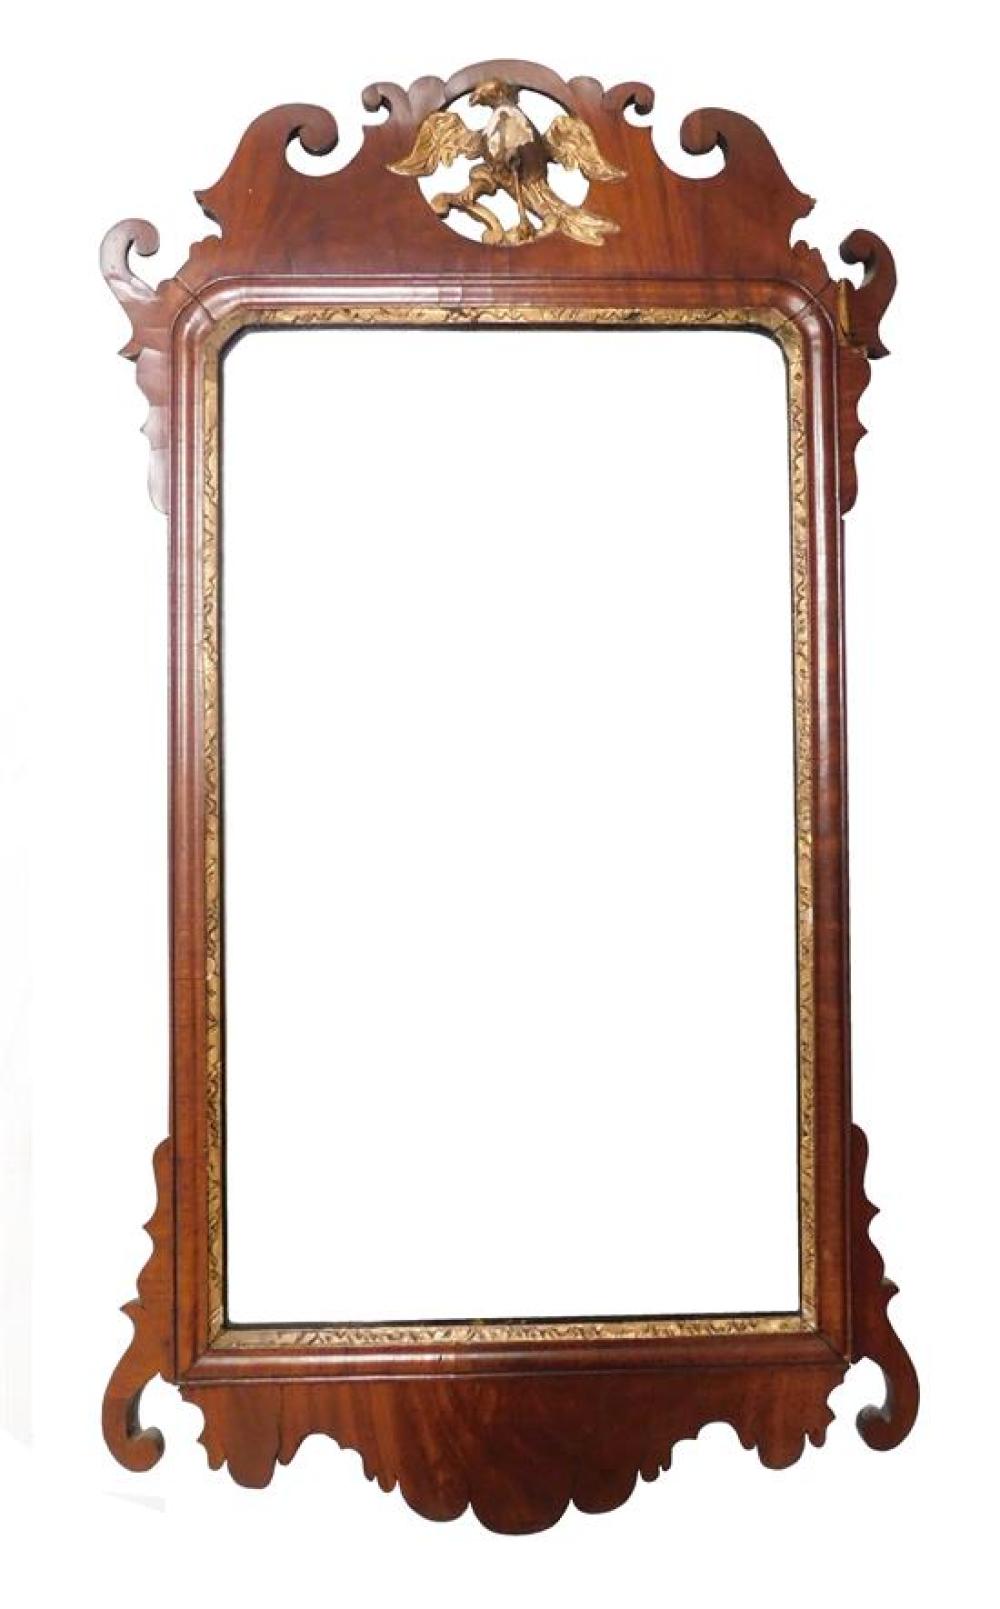 CHIPPENDALE WALL MIRROR AMERICAN  31cc9c